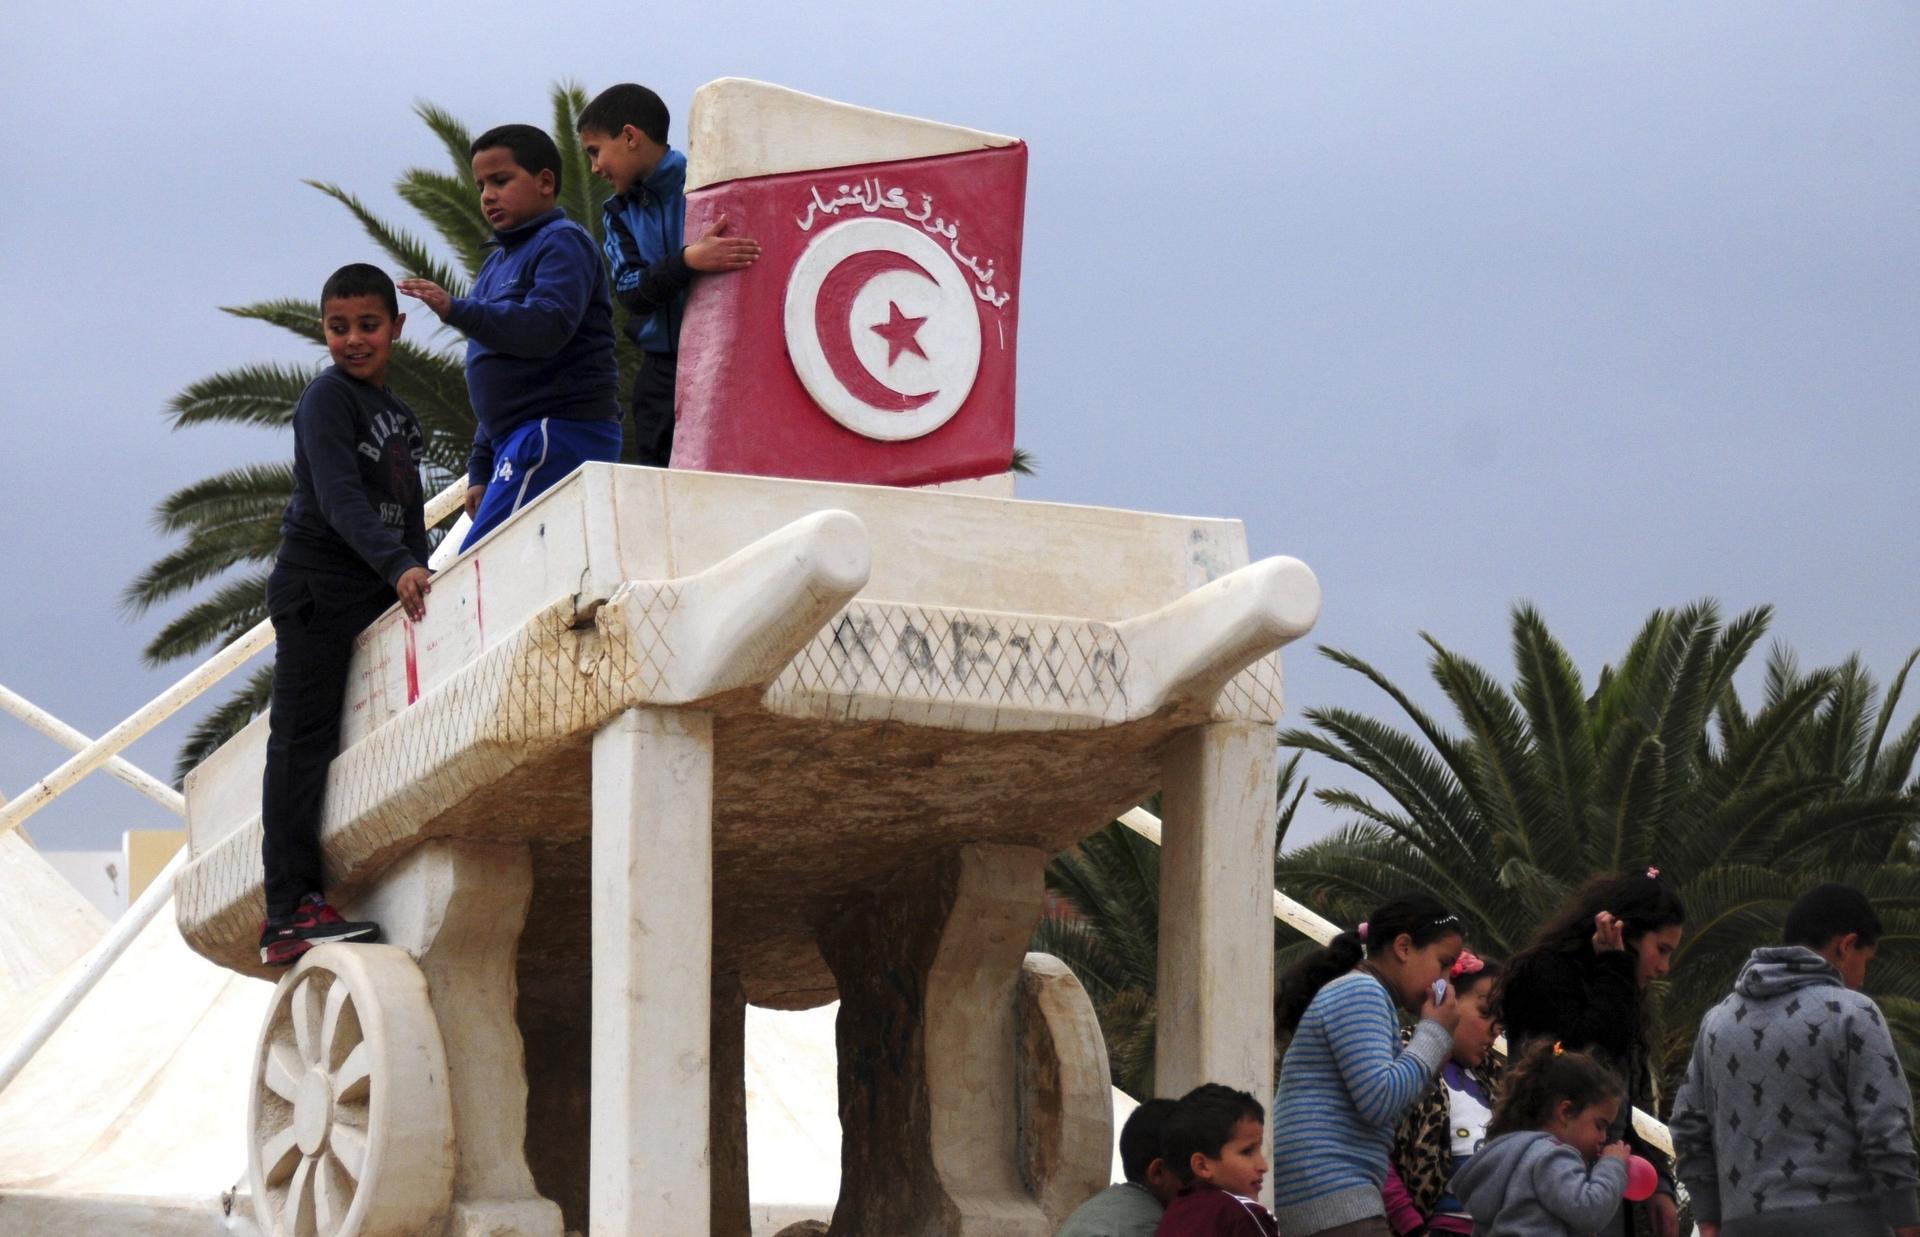 Children play on a statue of a wooden cart like that used by Mohamed Bouazizi to sell fruits, in Sidi Bouzid, Tunisia, Dec.17, 2015. Tunisians who won the Nobel Peace Prize joined townspeople in the country's beleaguered heartland to mark five years since